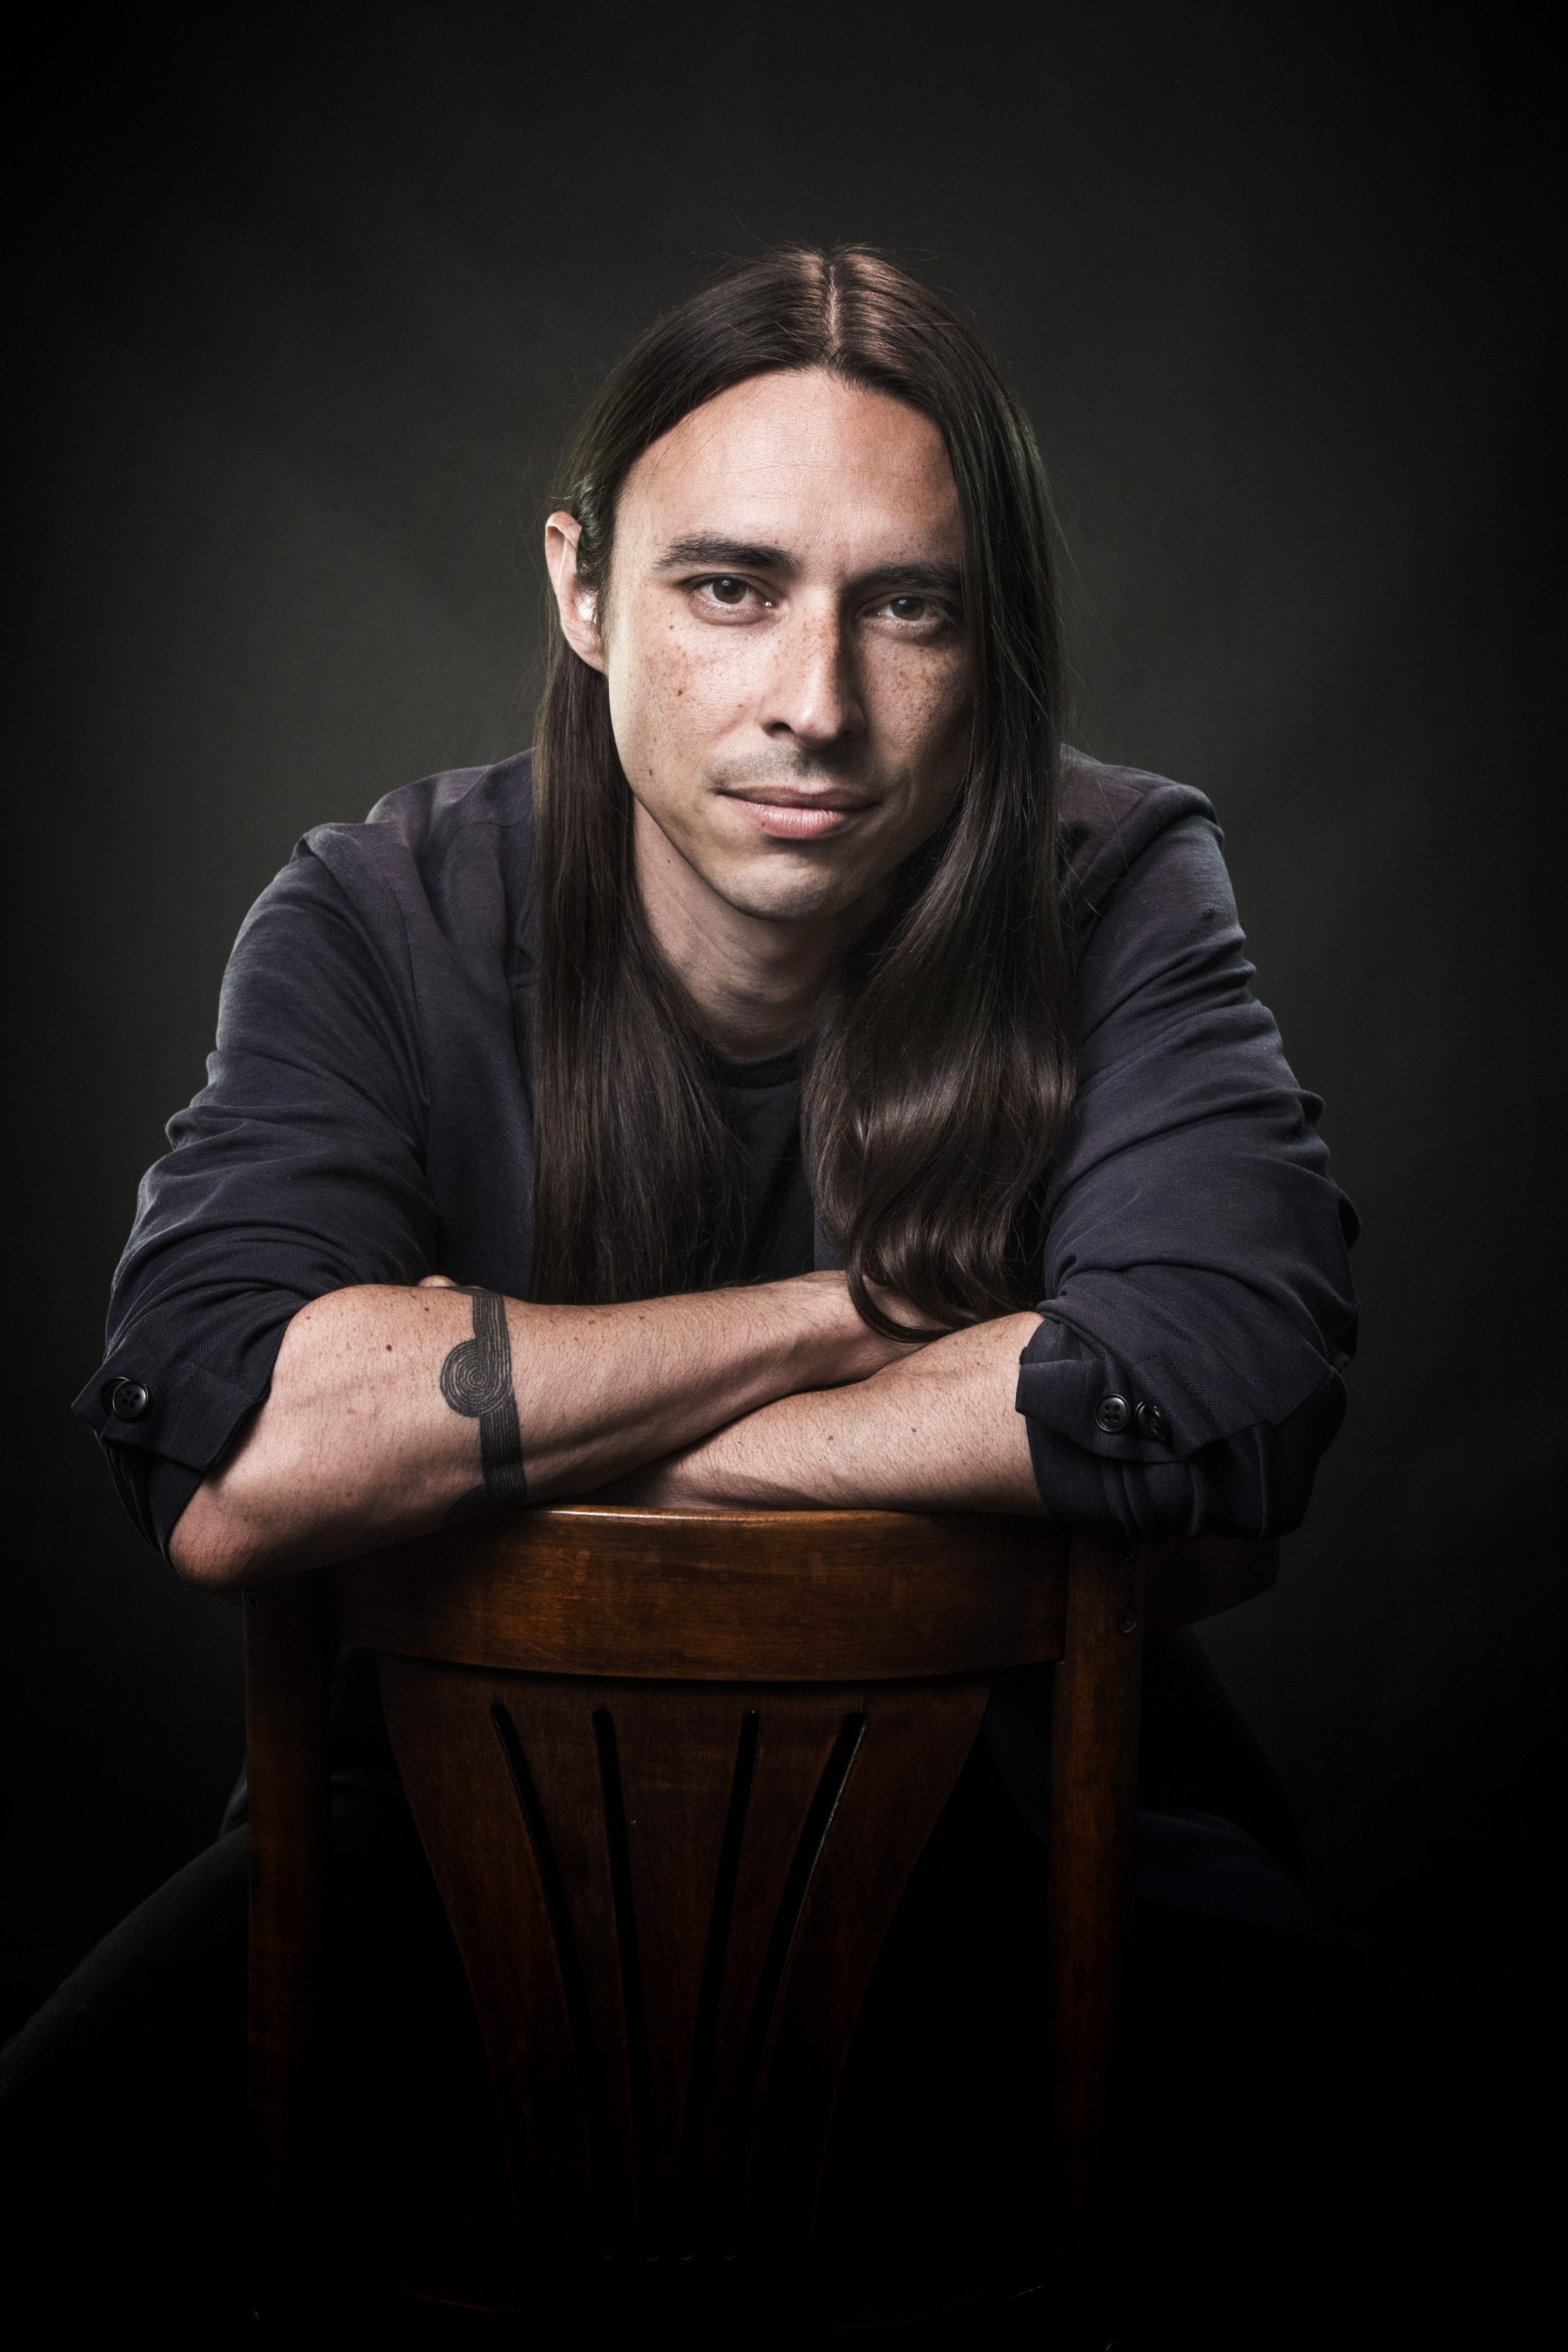 Joseph is featured centered in the photograph in a studio with a black backdrop. The photograph is largely black except for where Joseph is shown, leaning his forearms on a stool, facing the camera and smiling. He is wearing a black long sleeve shirt.